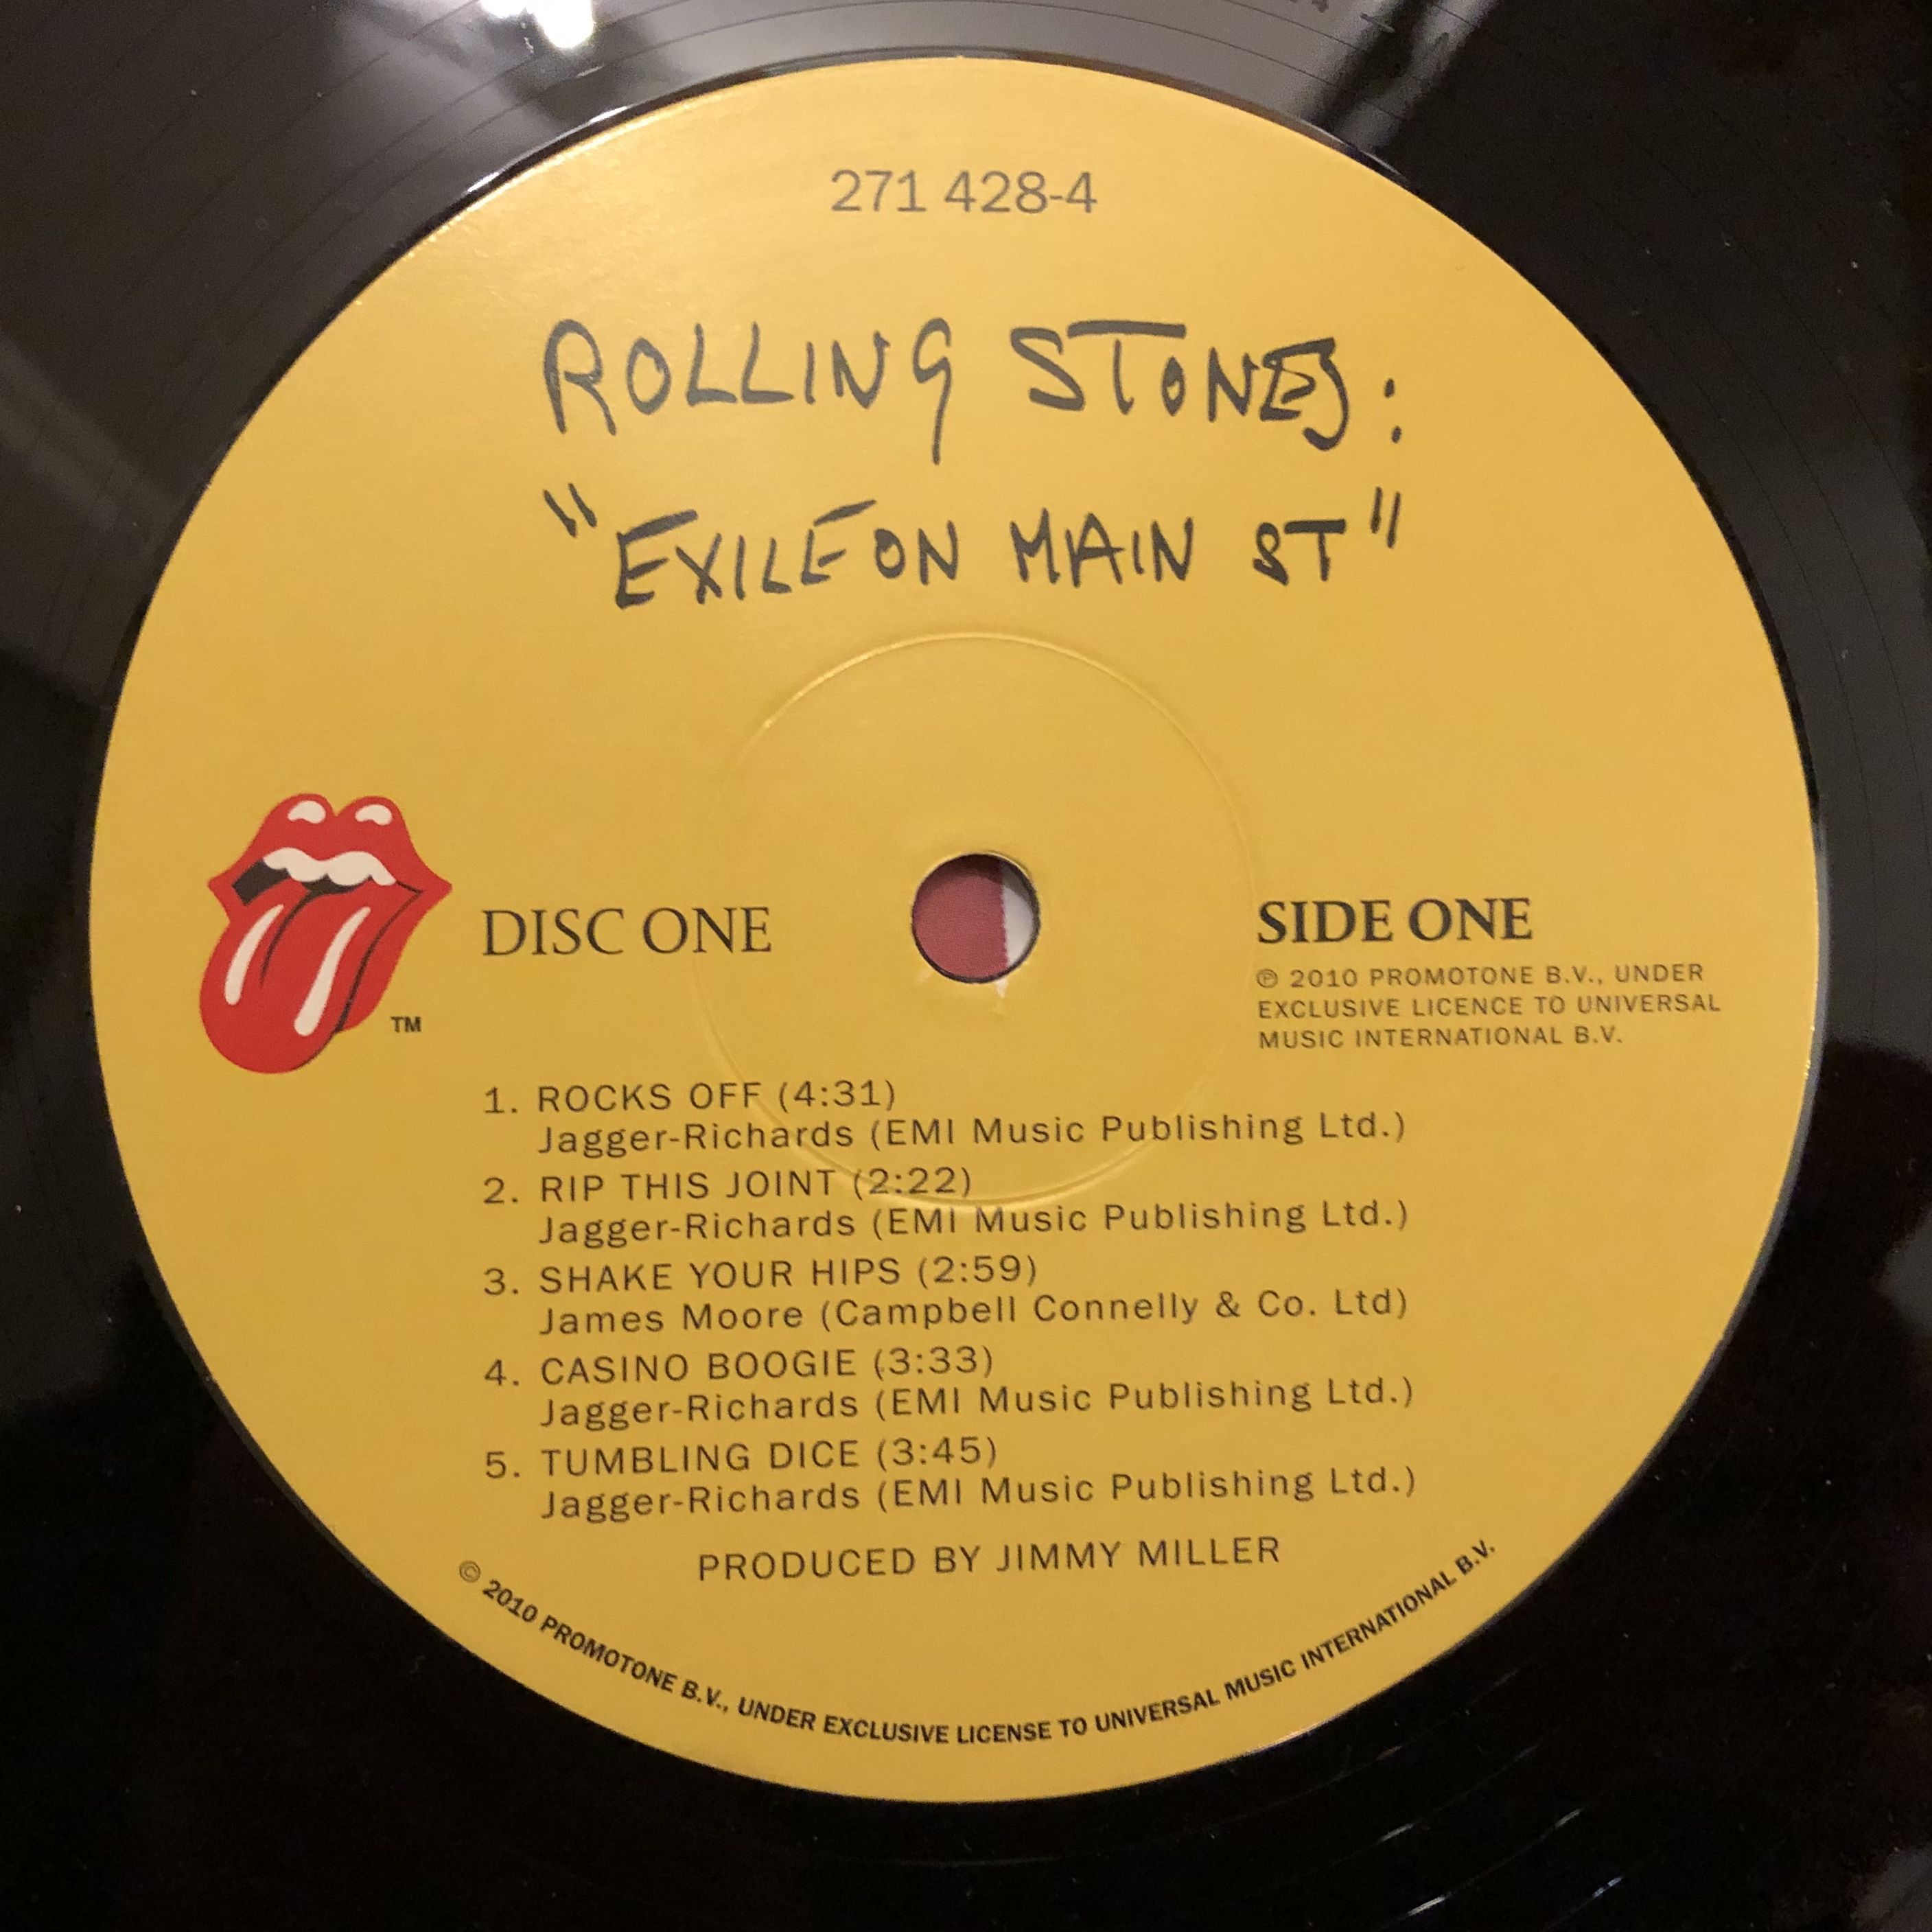 The Rolling Stones Exile on Main St. LP 